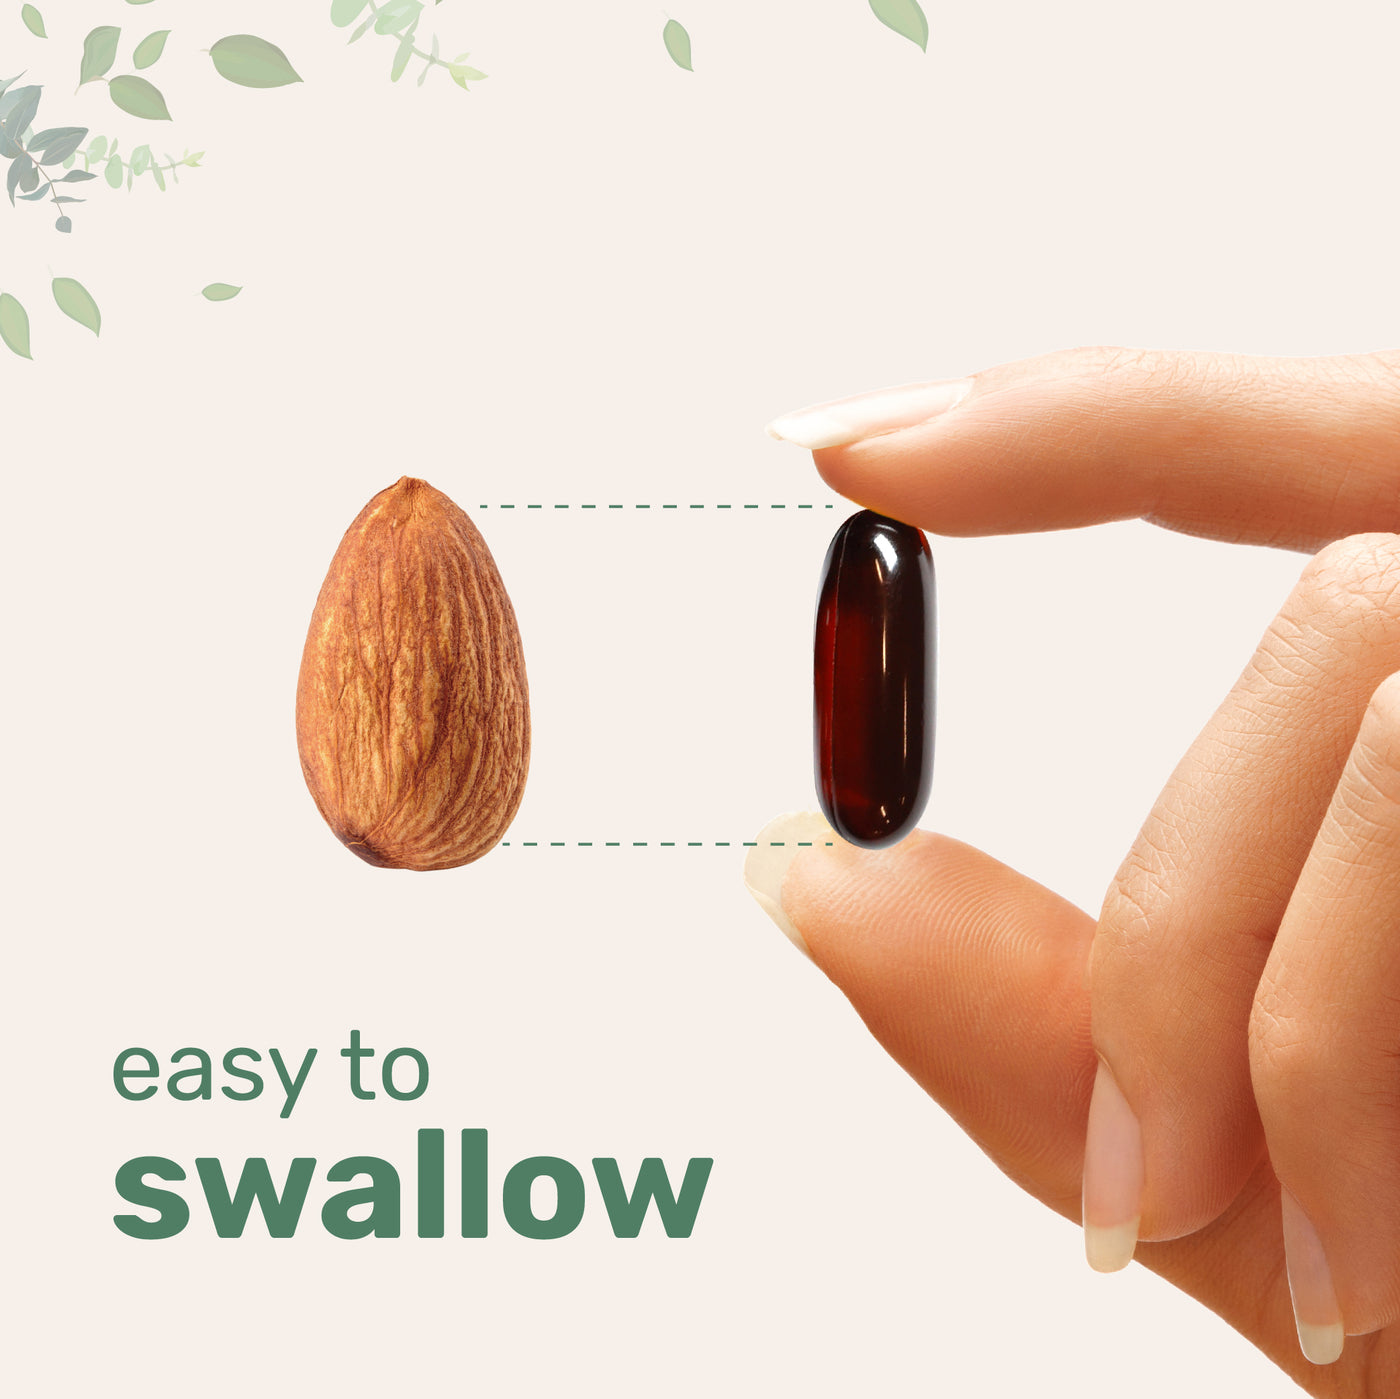 Pumpkin Seed Oil with Saw Palmetto Softgels